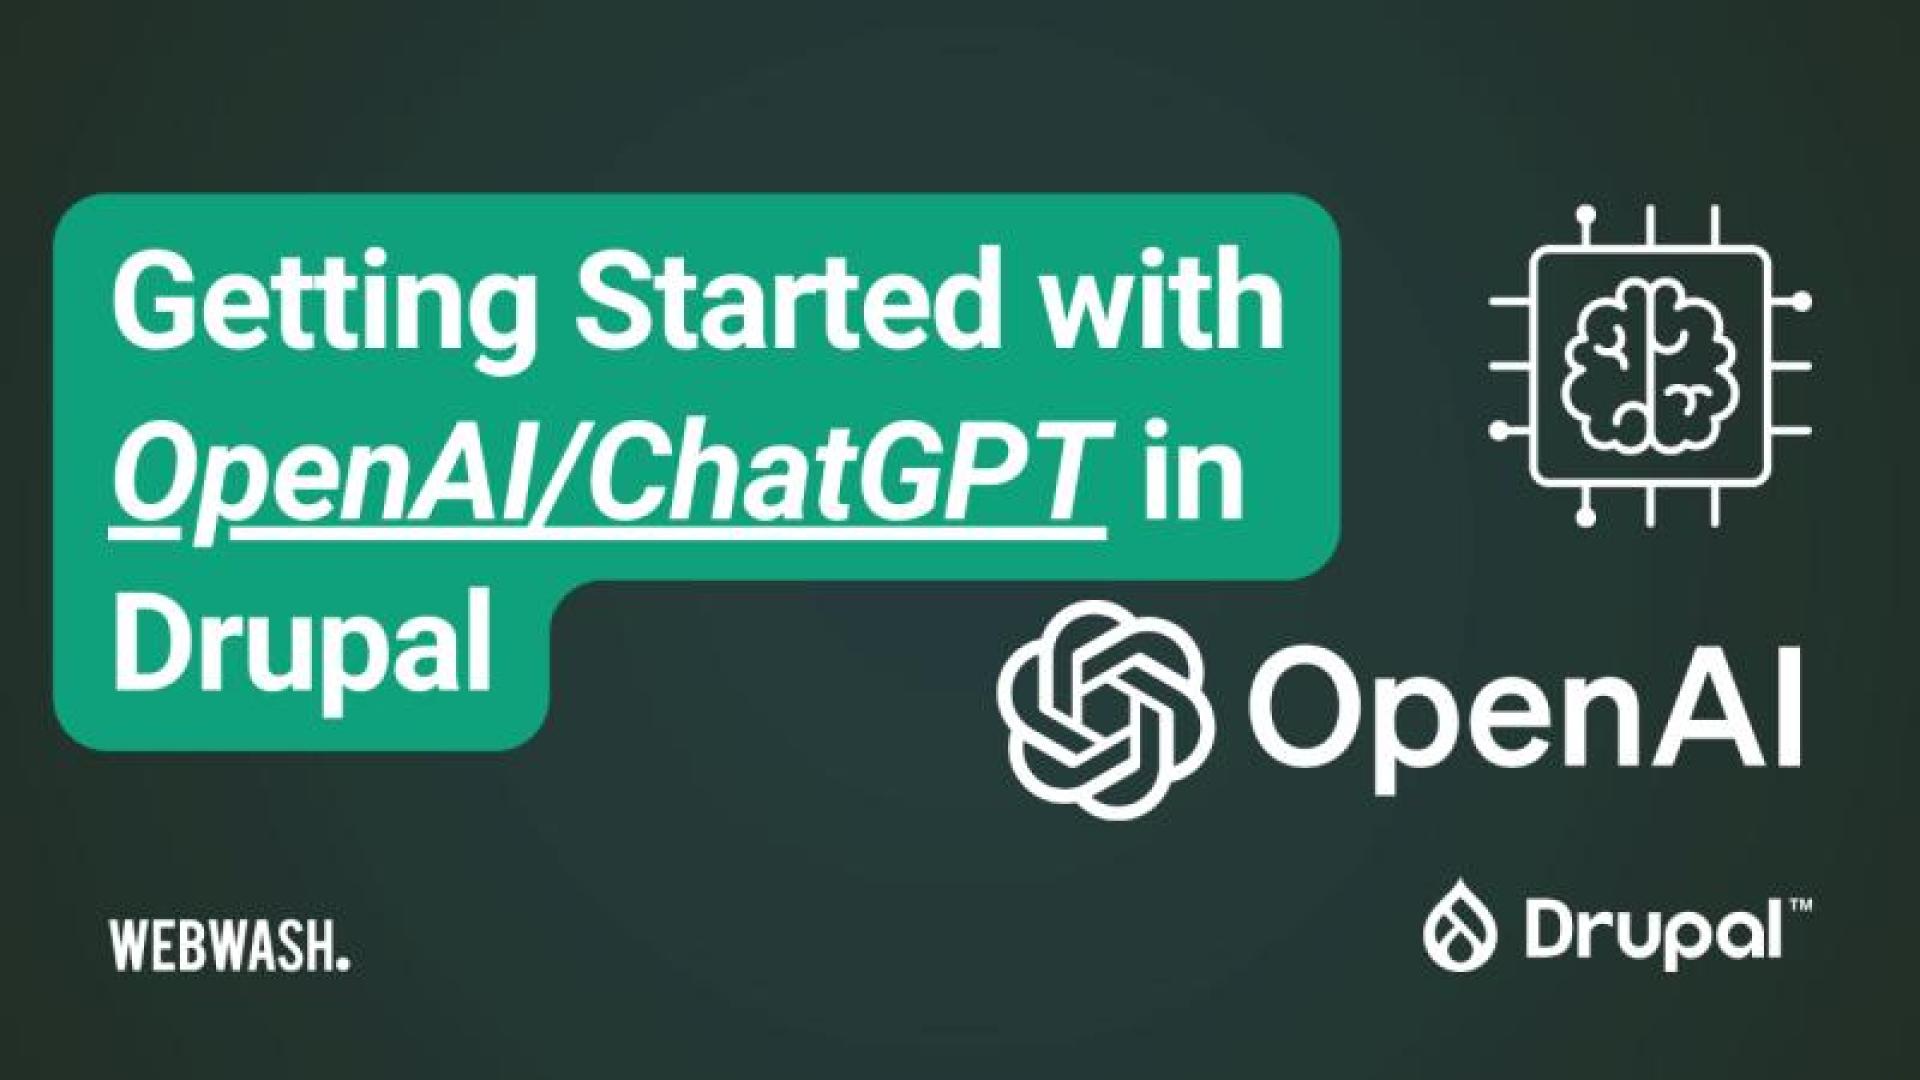 Getting Started with OpenAI/ChatGPT in Drupal